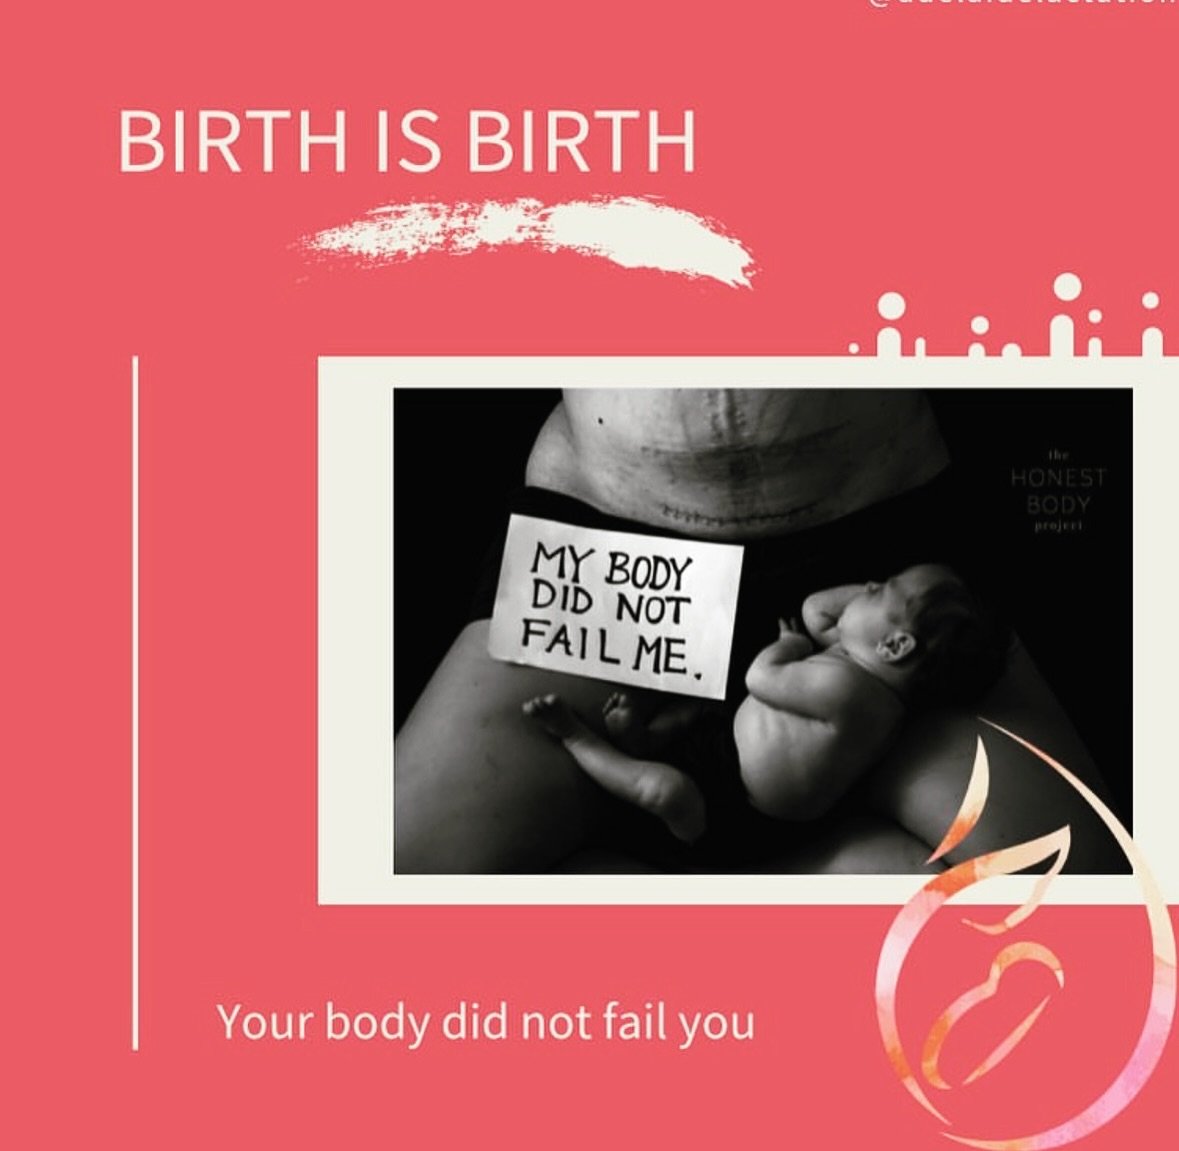 💫 April is Caesarean Awareness Month💫
It took me years to come to terms with my caesarean birth.  I somehow felt like a failure or less of a woman for not being able to birth naturally.
In the end, I laboured really well and easily...... but my bab